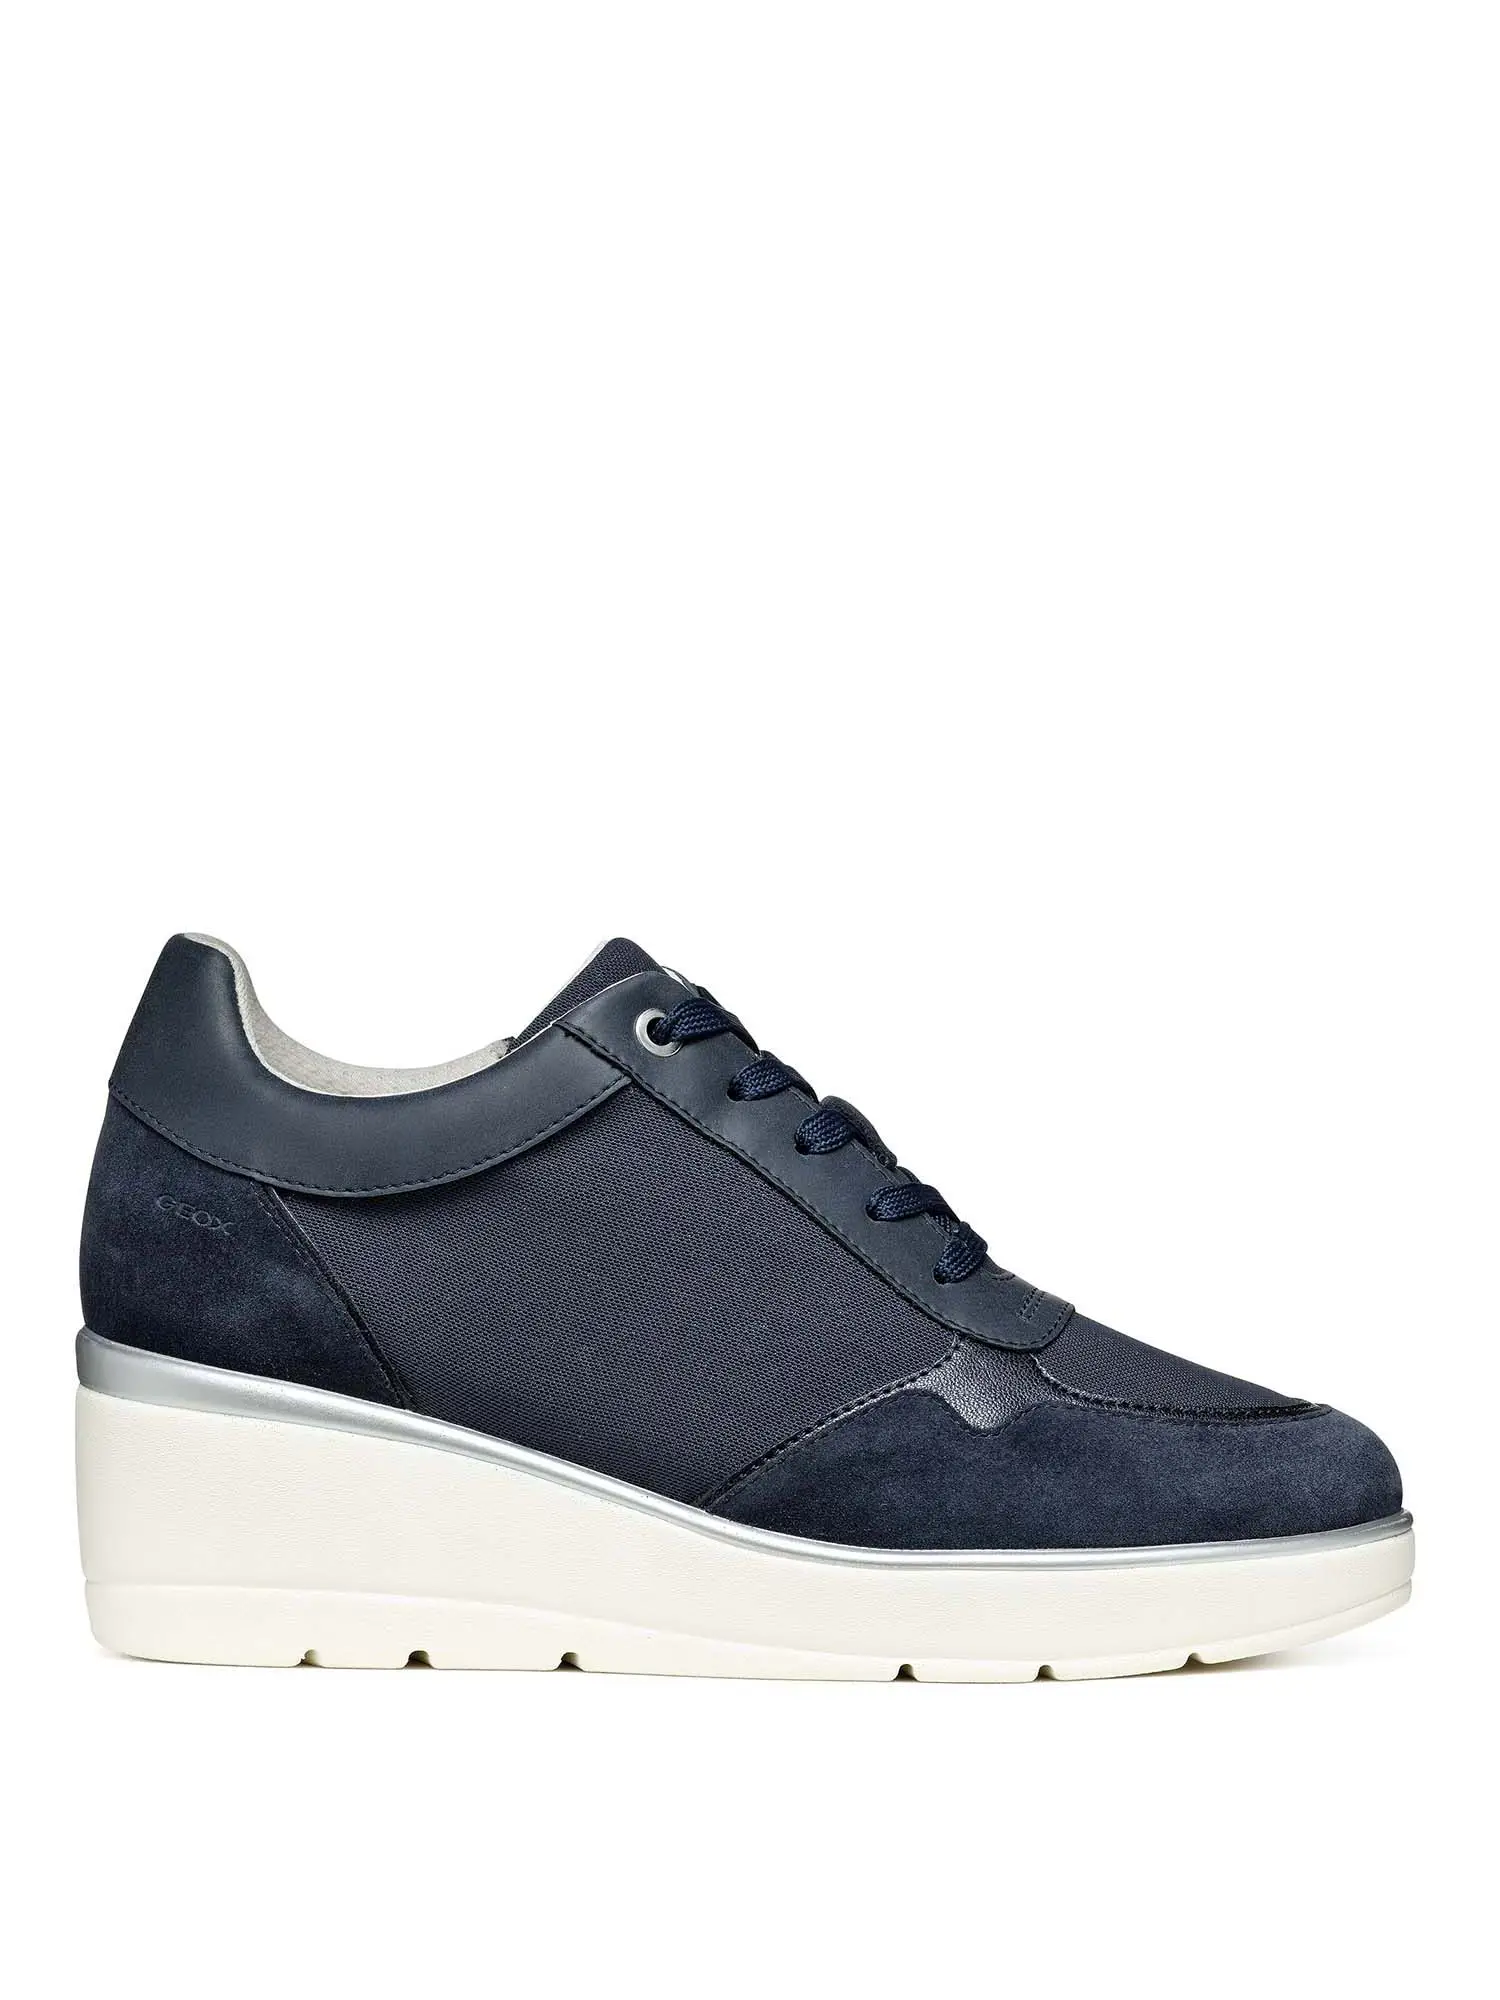 SNEAKERS DONNA - GEOX - D25RAA 0AS22 - JEANS, 39